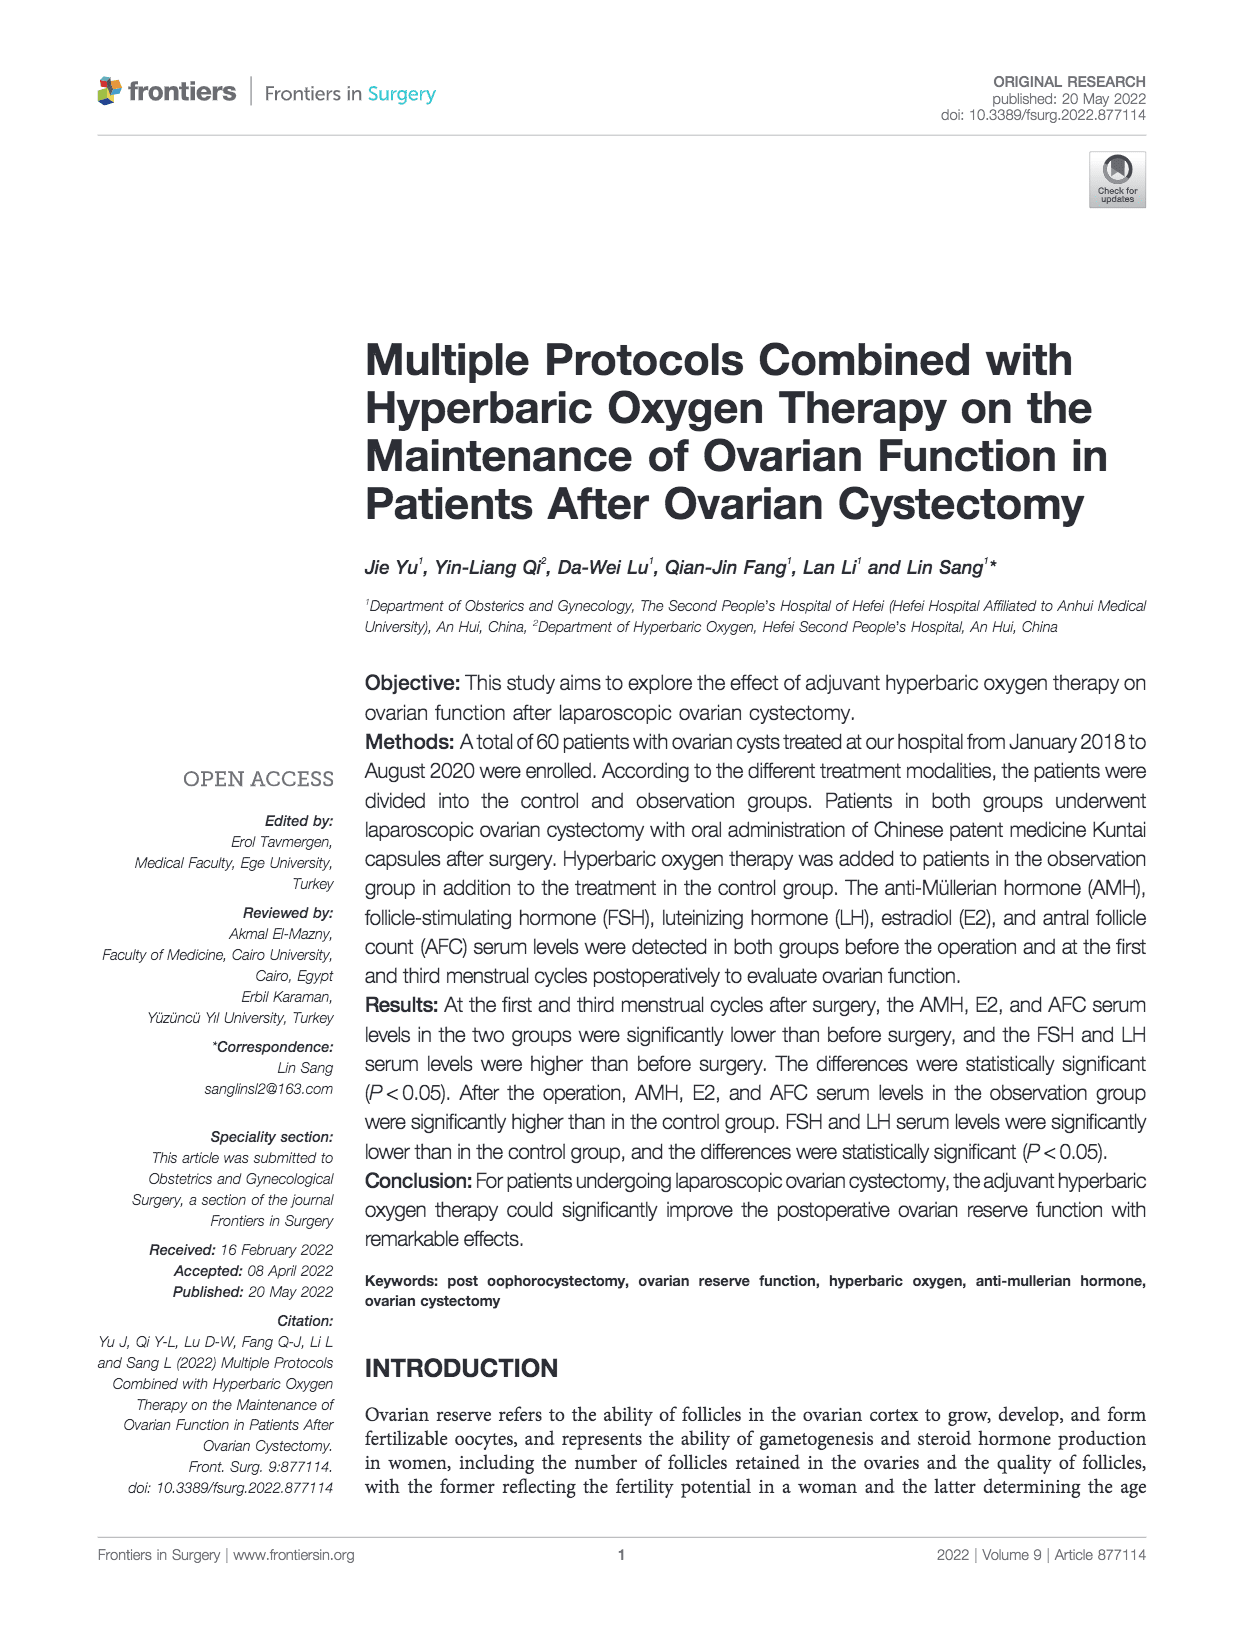 hyperbaric oxygen therapy ovarian function, after ovarian cystectomy, cancer, radiation damage